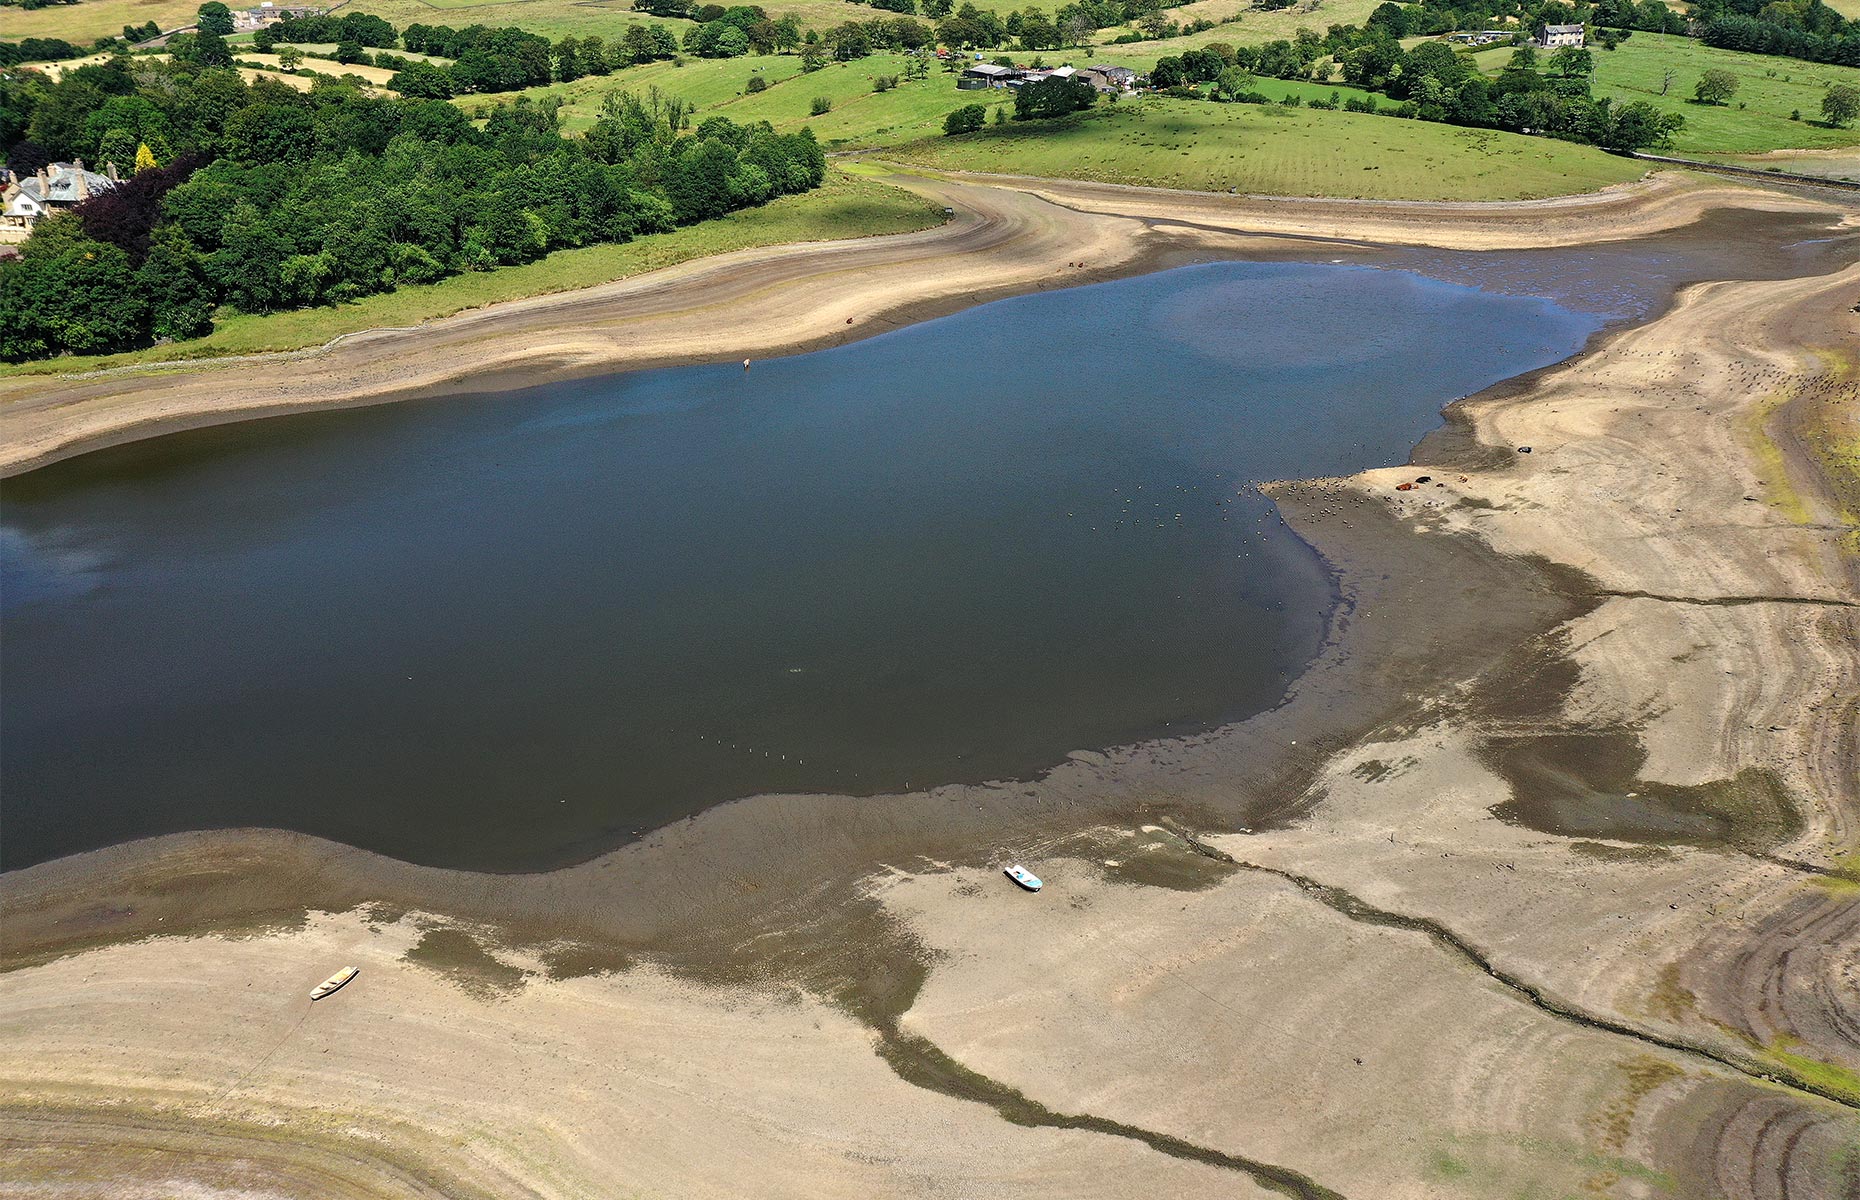 An aerial view of the low water levels at Foulridge Upper reservoir. (Image: Christopher Furlong / Staff / Getty Images)